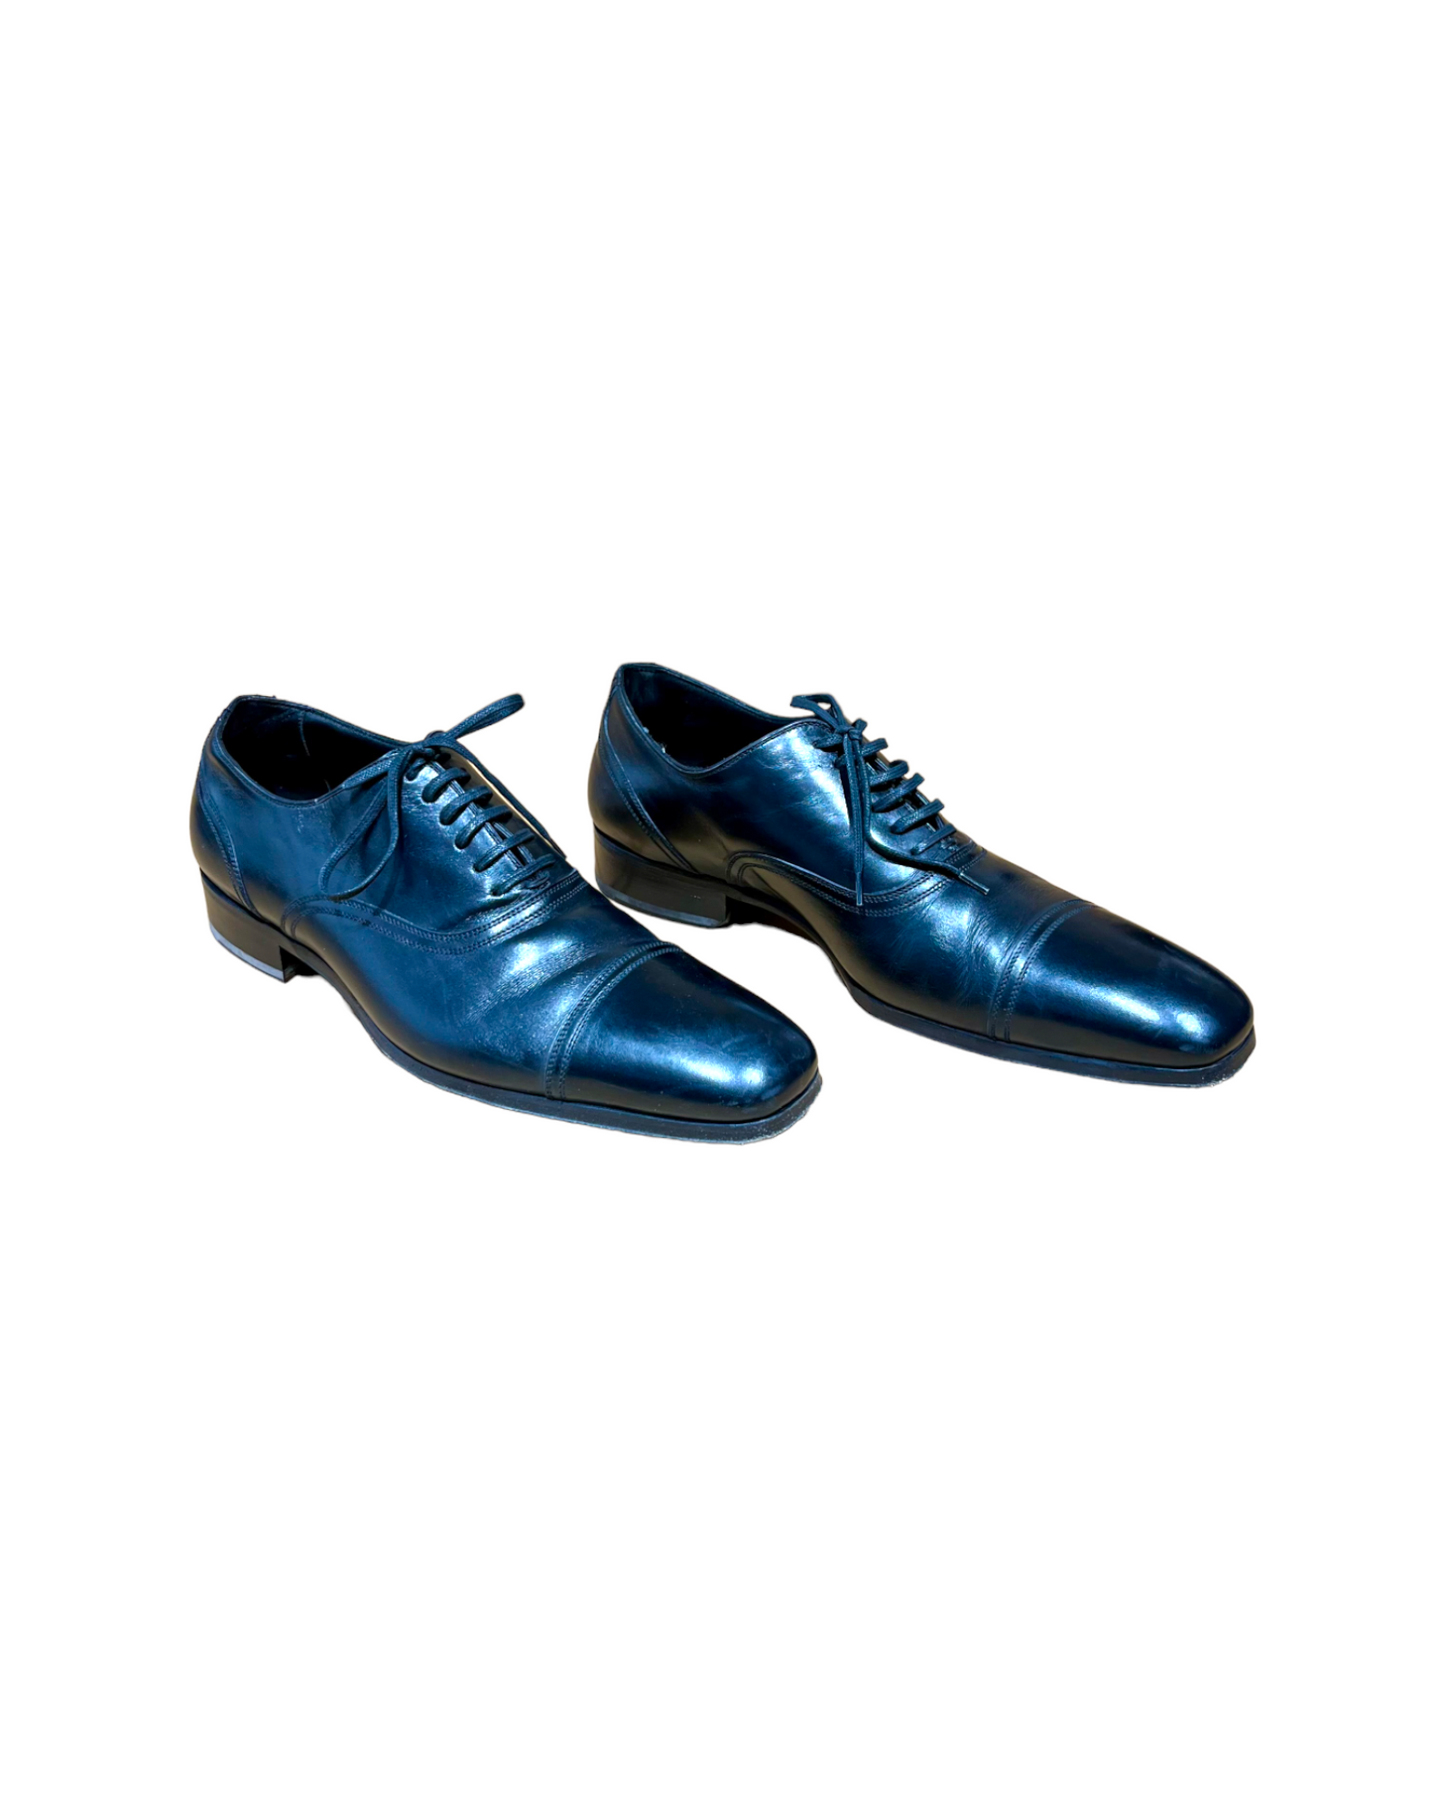 Tom Ford Black Lace Up Shoes